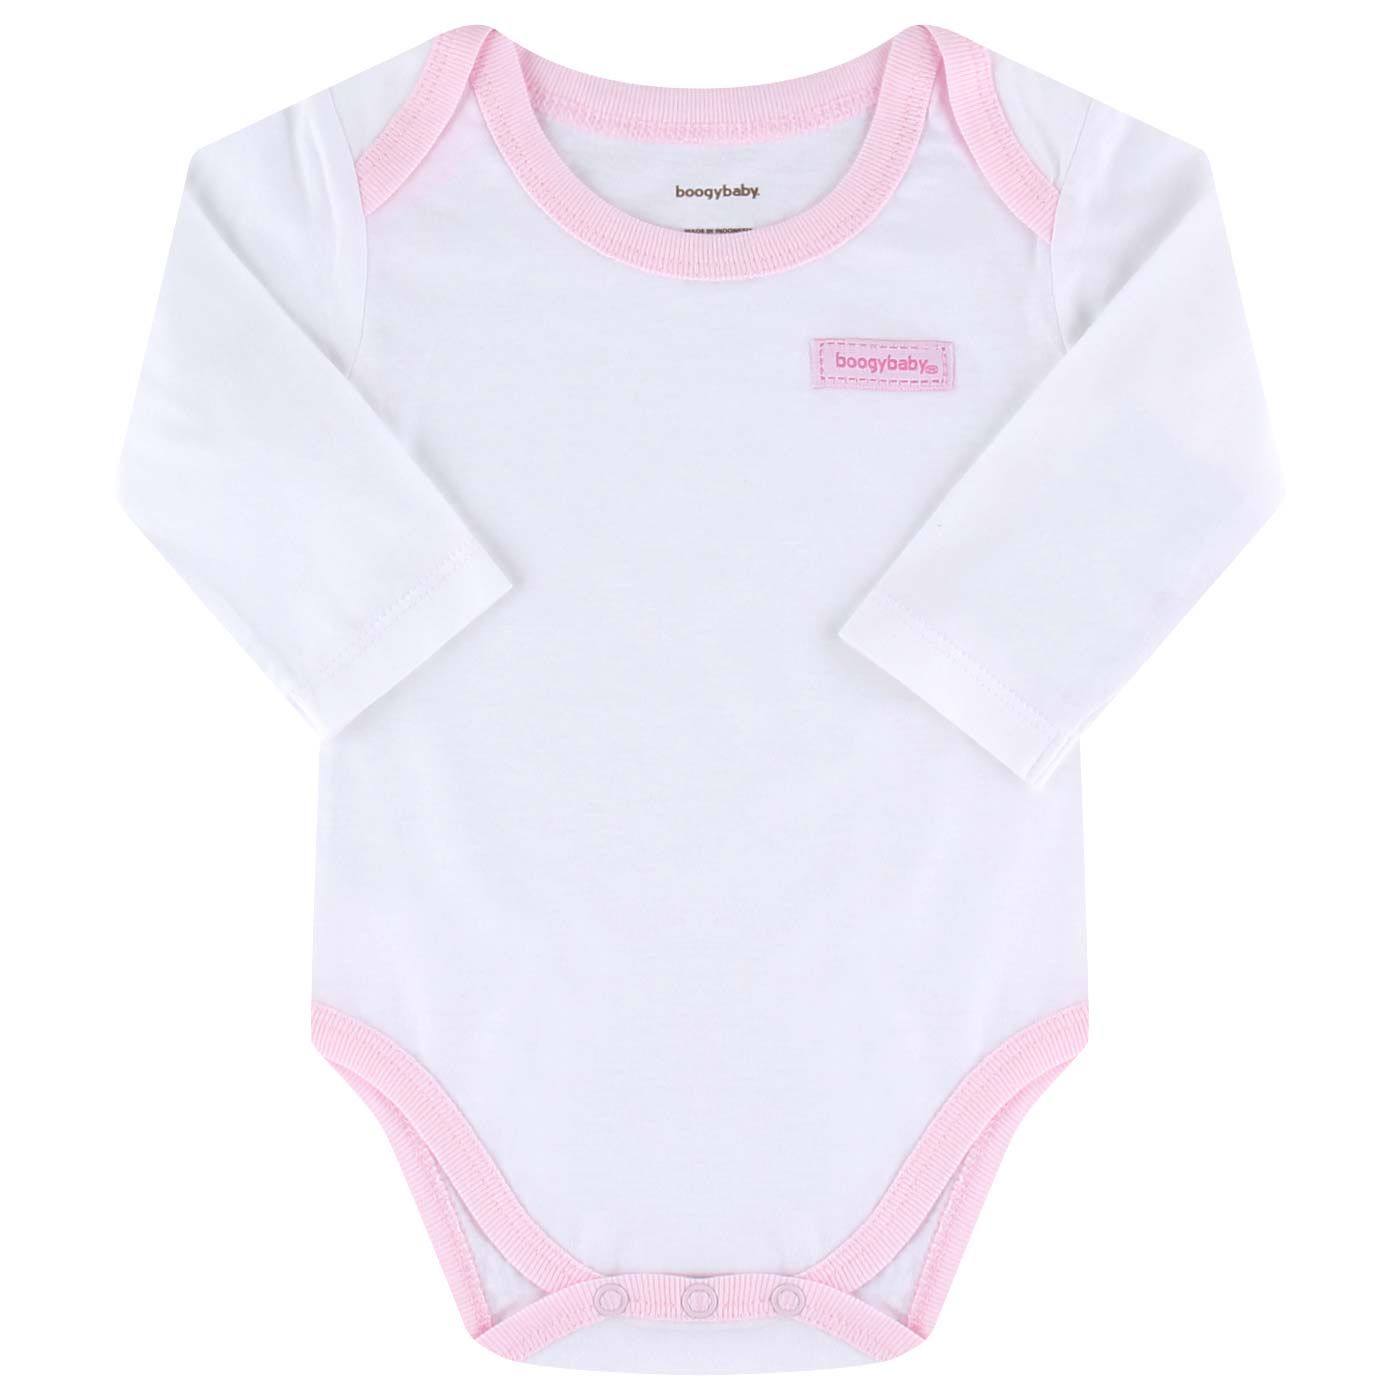 Boogybaby Jumpsuit-NB Month-Pink - 1